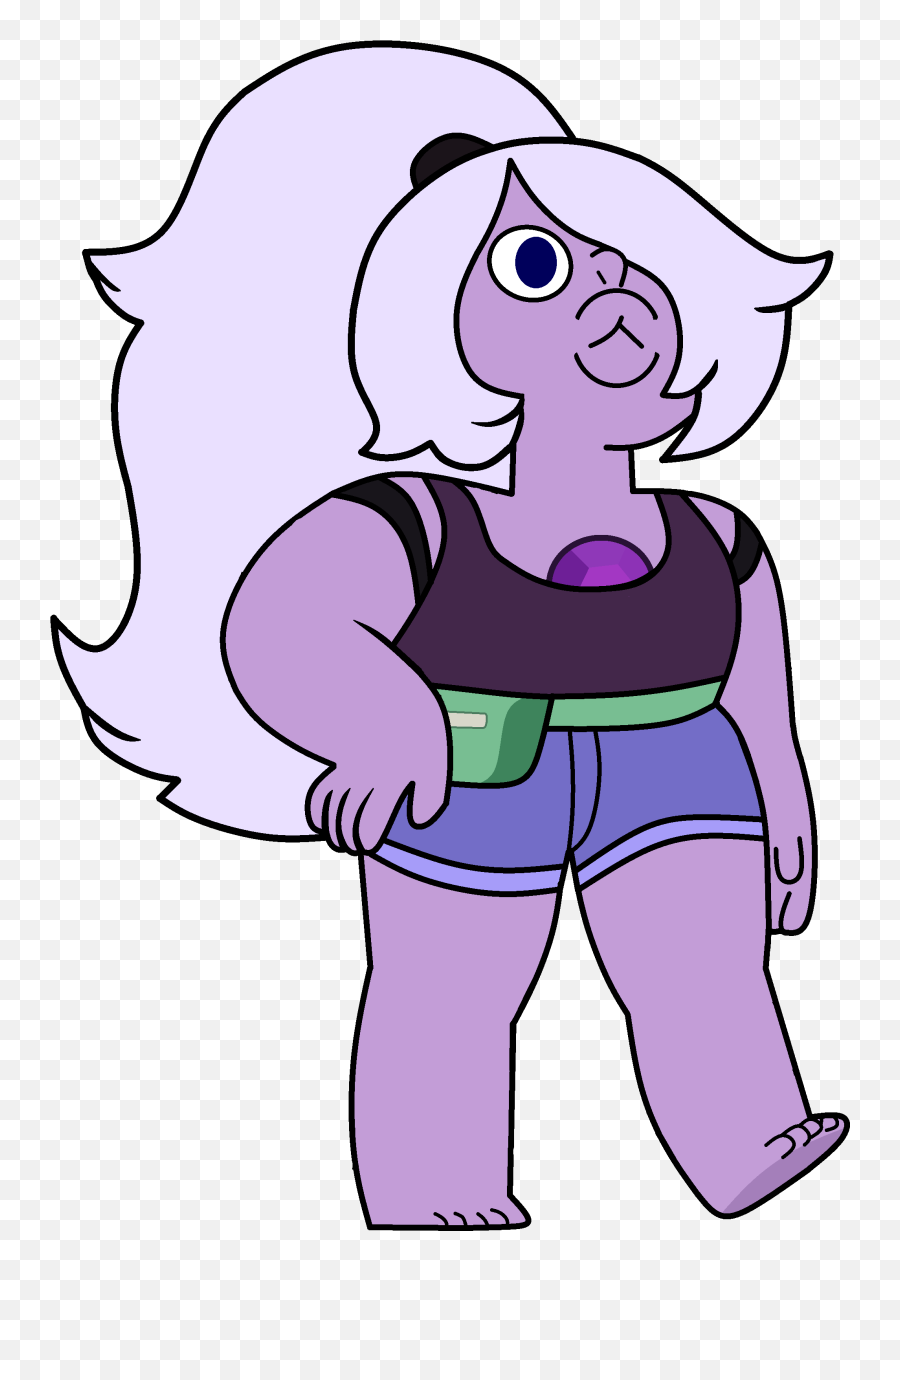 Steven Universe Amethyst Png Image With - Beach Amethyst Steven Universe,Steven Universe Amethyst Png